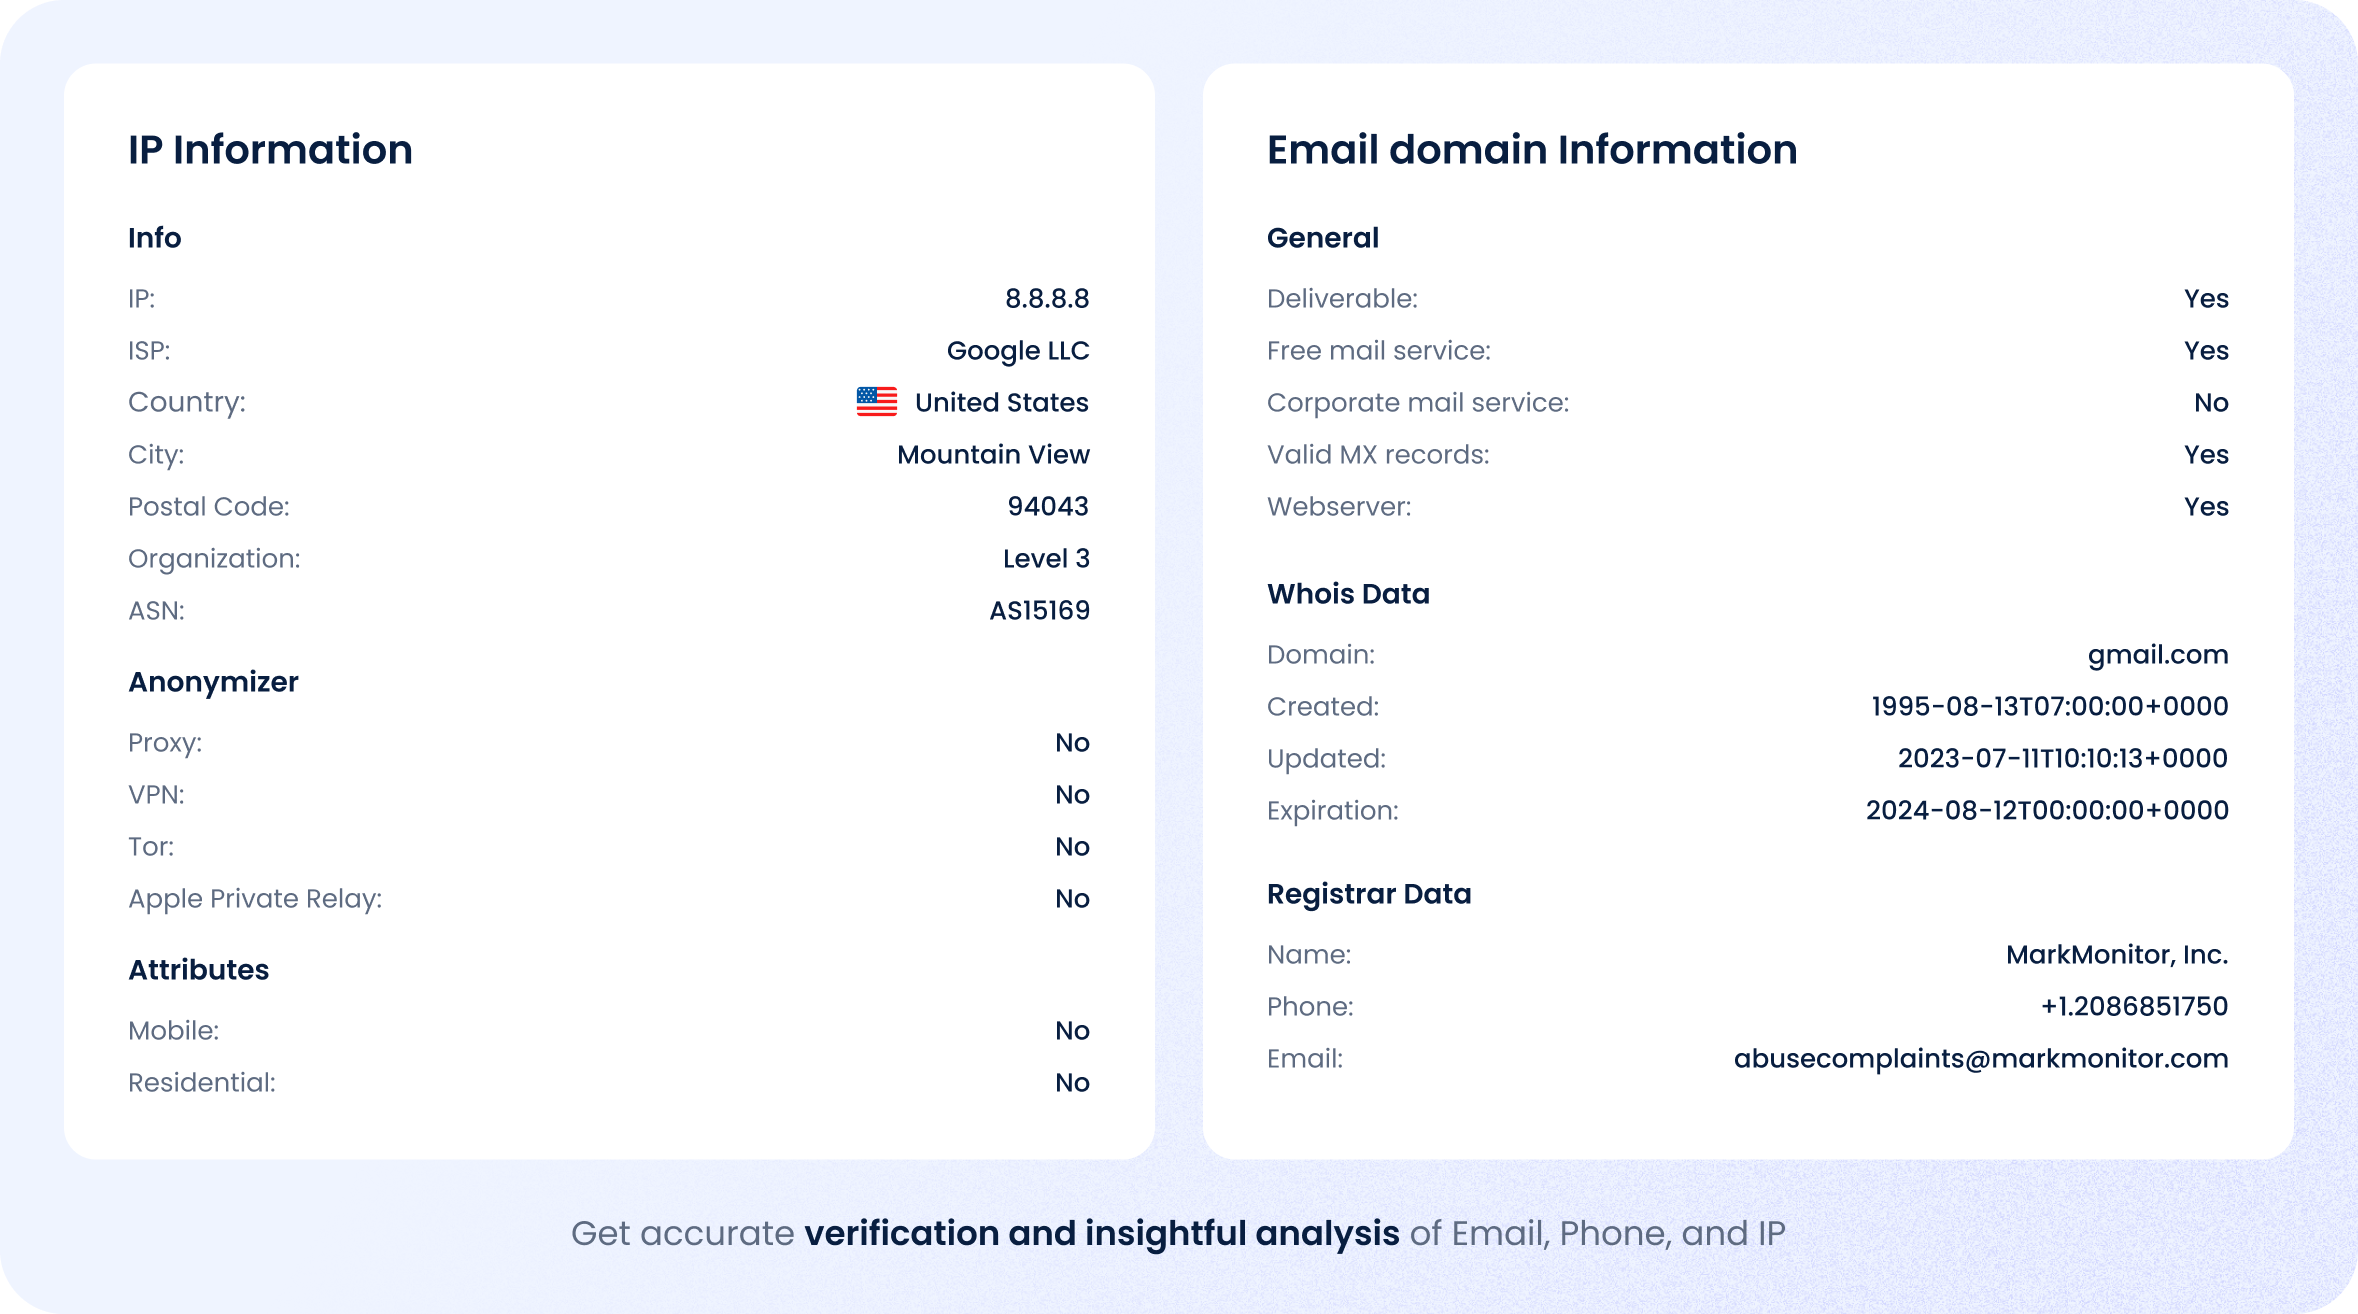 Accurate verification and insightful analysis of Email, Phone, and IP.